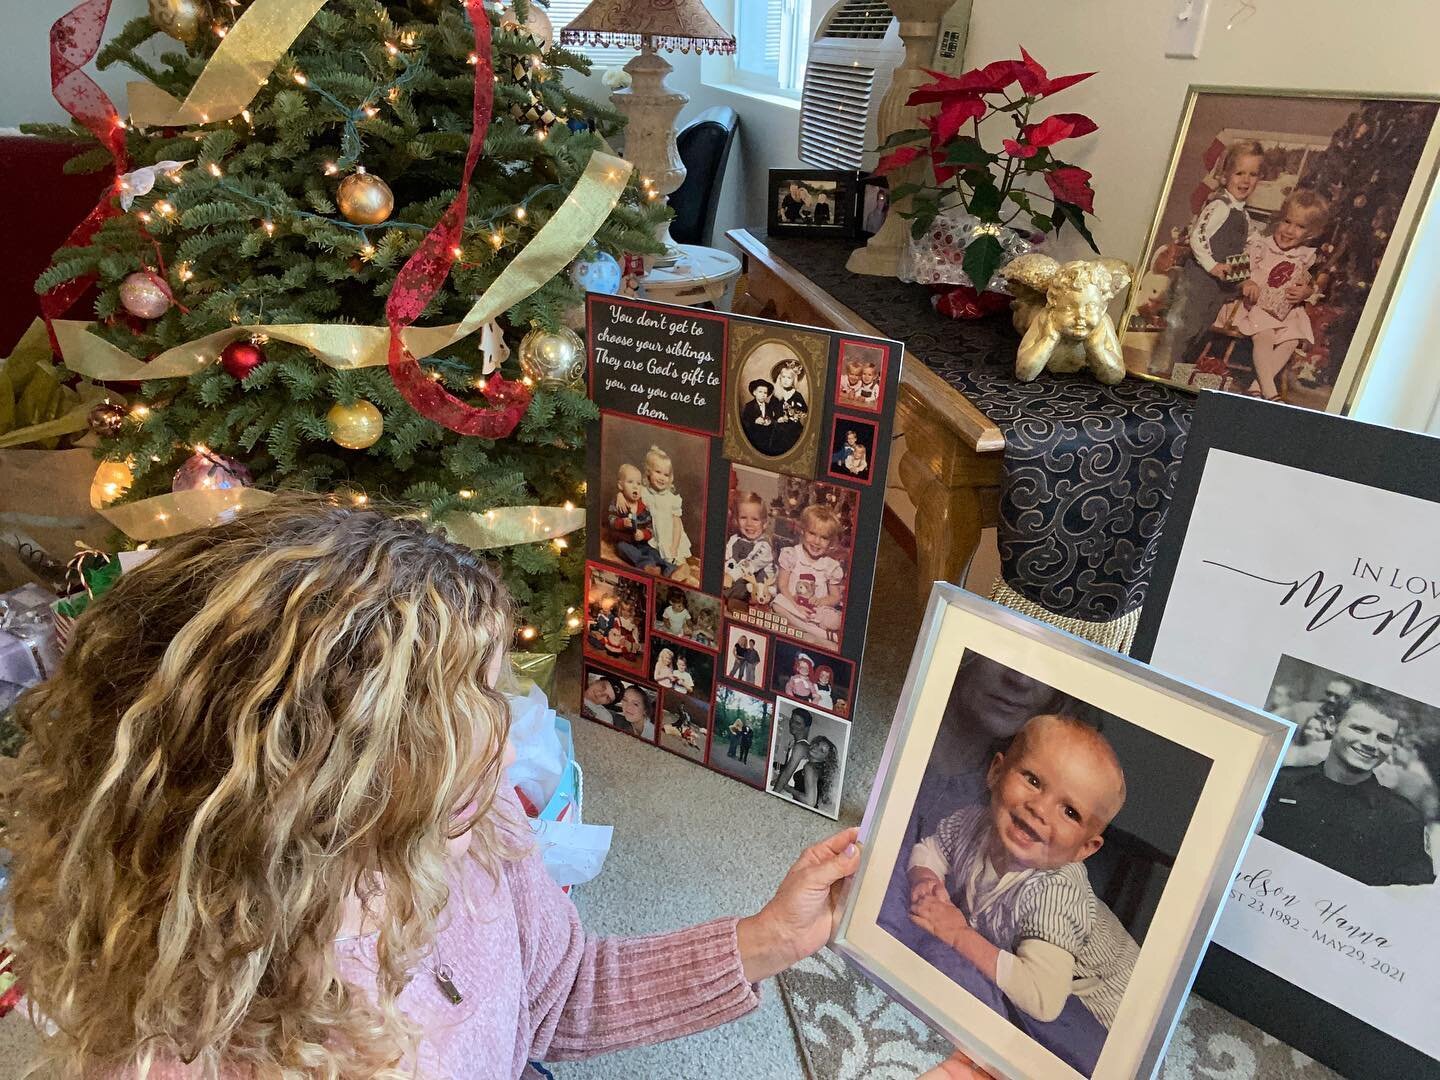 Remembering my precious son, Judson, and all the beautiful Christmas memories with our family. This is a VERY difficult time for me as I navigate this new path of radically altered circumstances in my life following the tragic death of my son. I am g